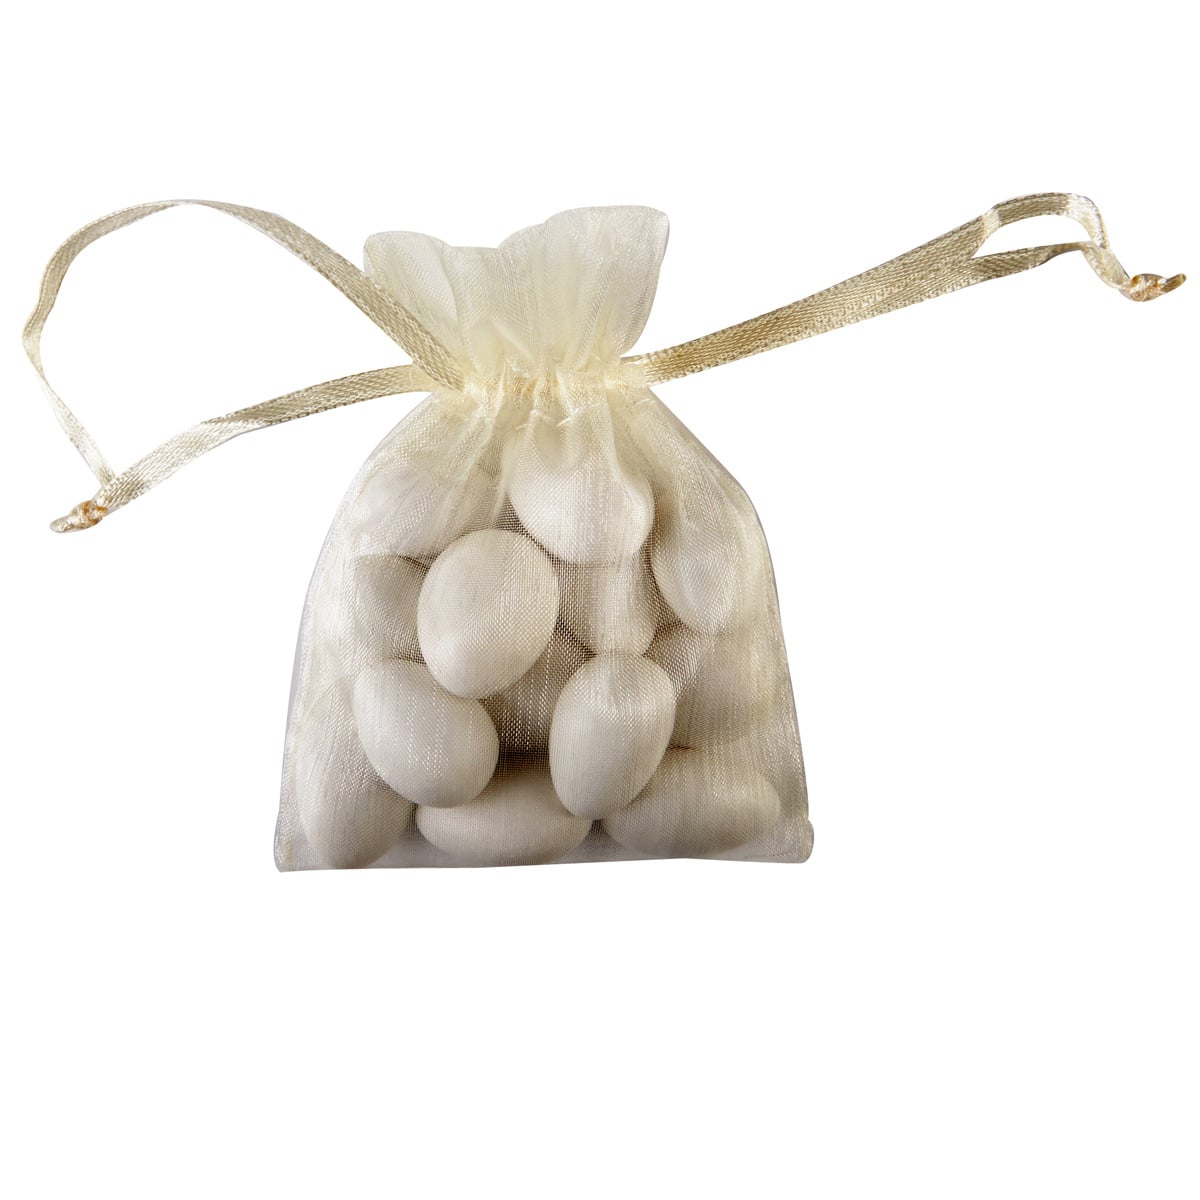 6 Packs: 50 ct. (300 total) Occasions Ivory Organza Bags by Celebrate It&#x2122;